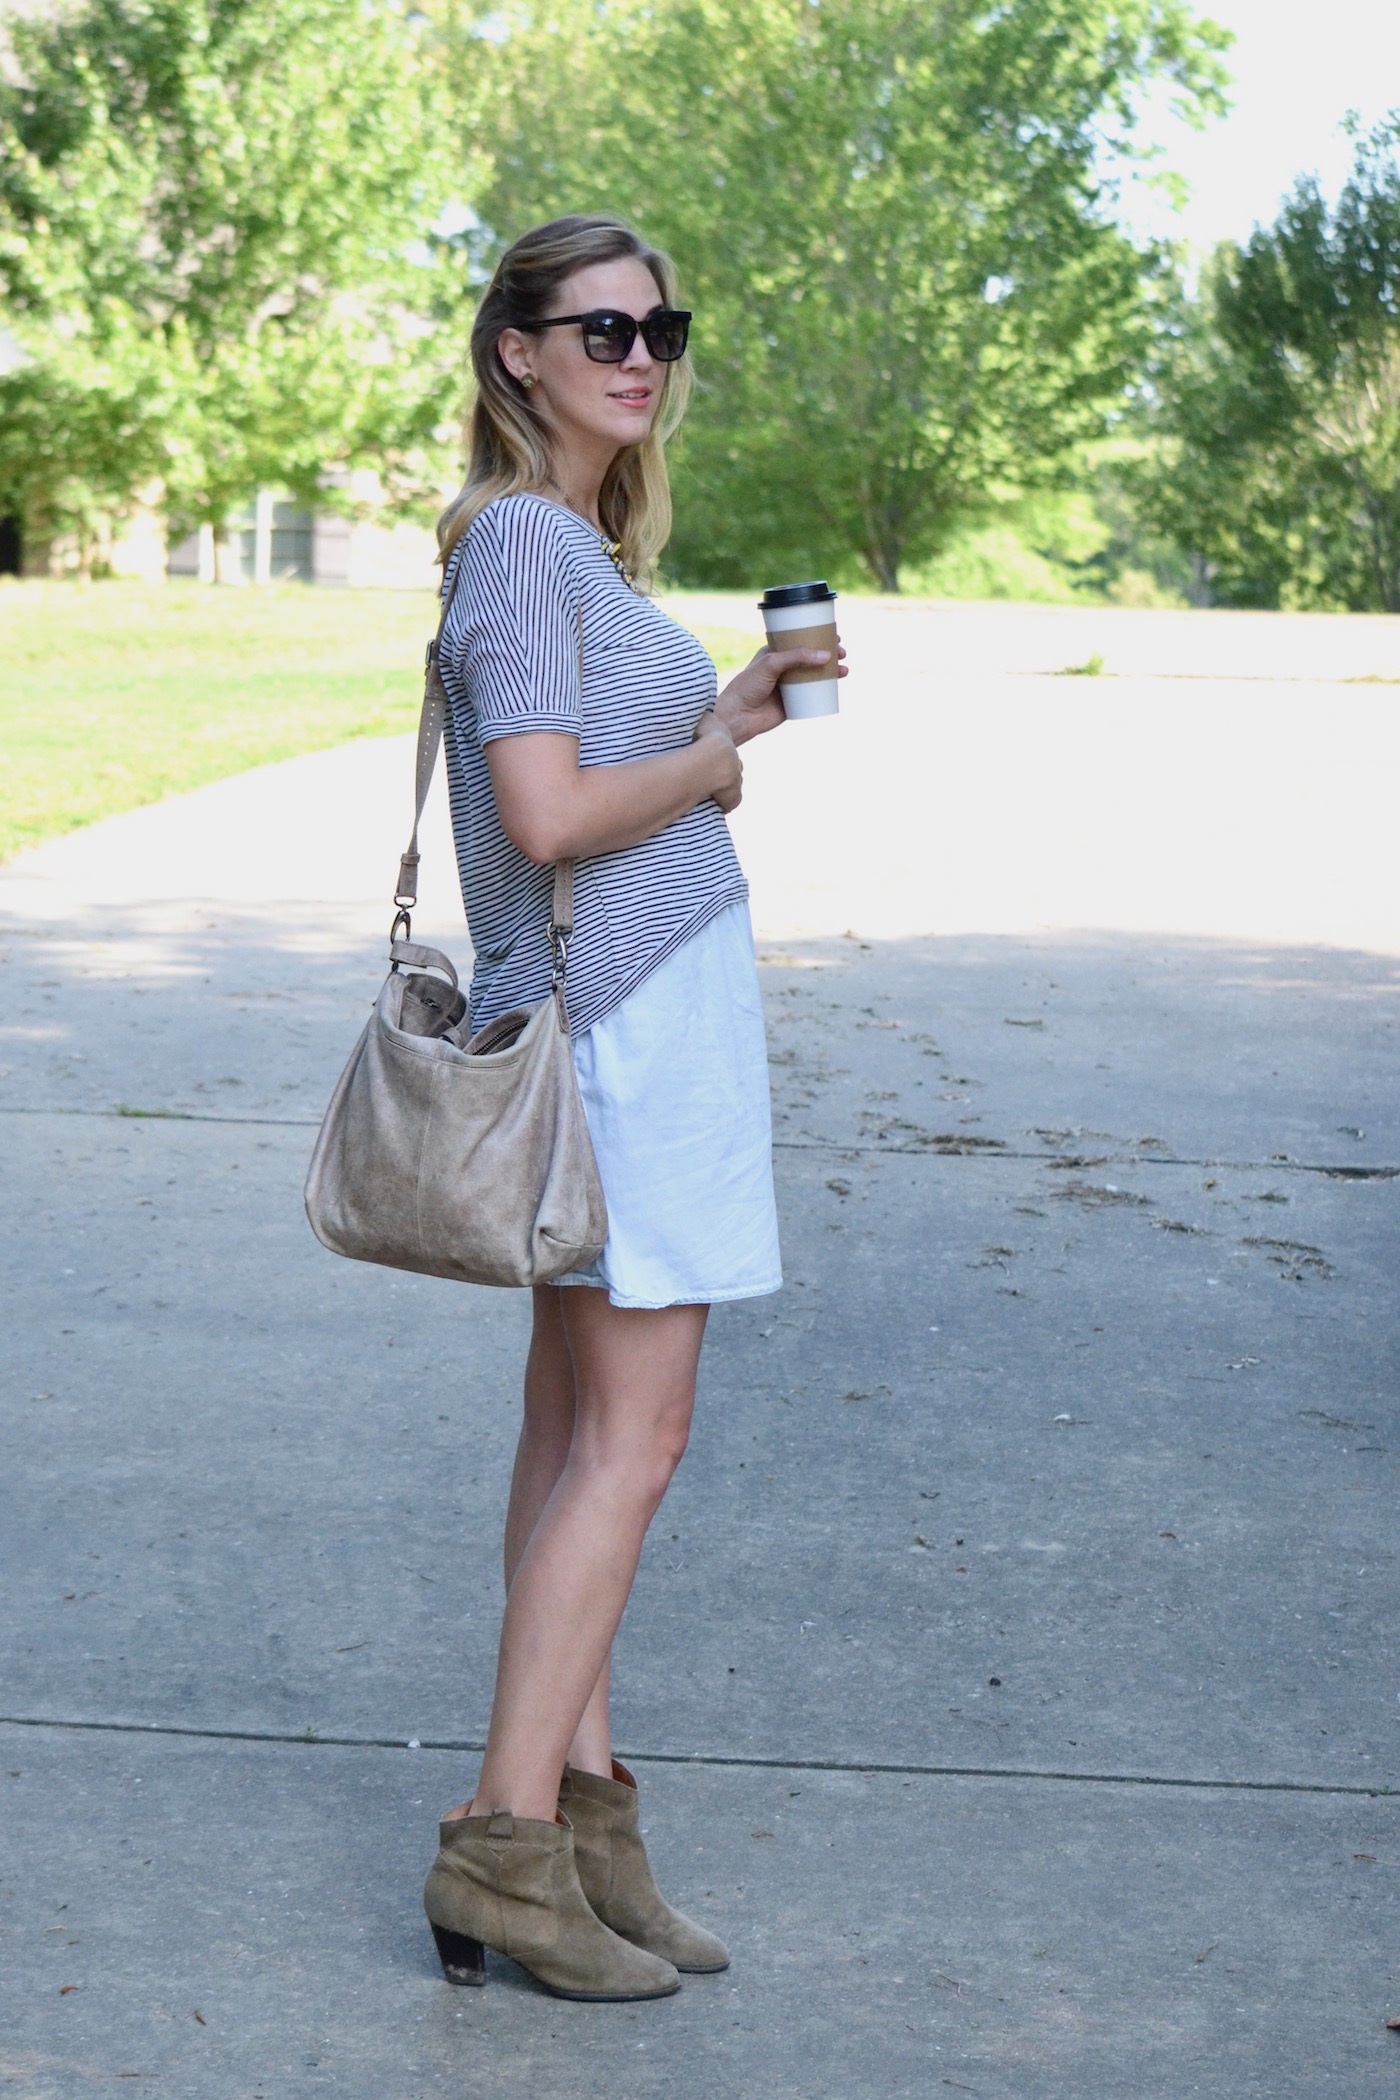 Layering while pregnant: How to dress in the first trimester // www.thehiveblog.com